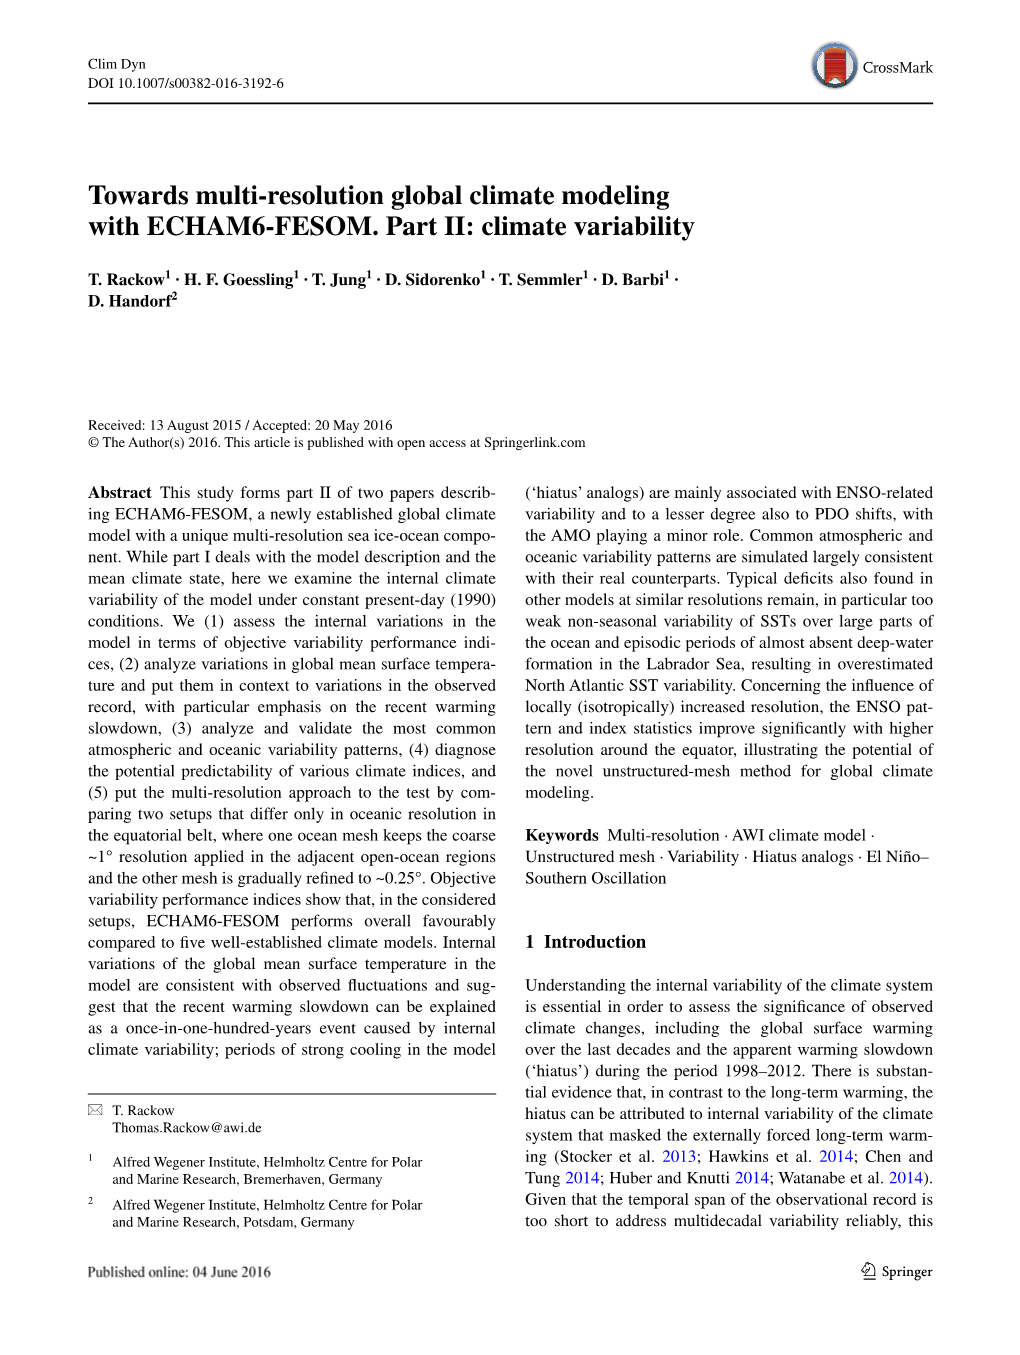 Towards Multi-Resolution Global Climate Modeling with ECHAM6